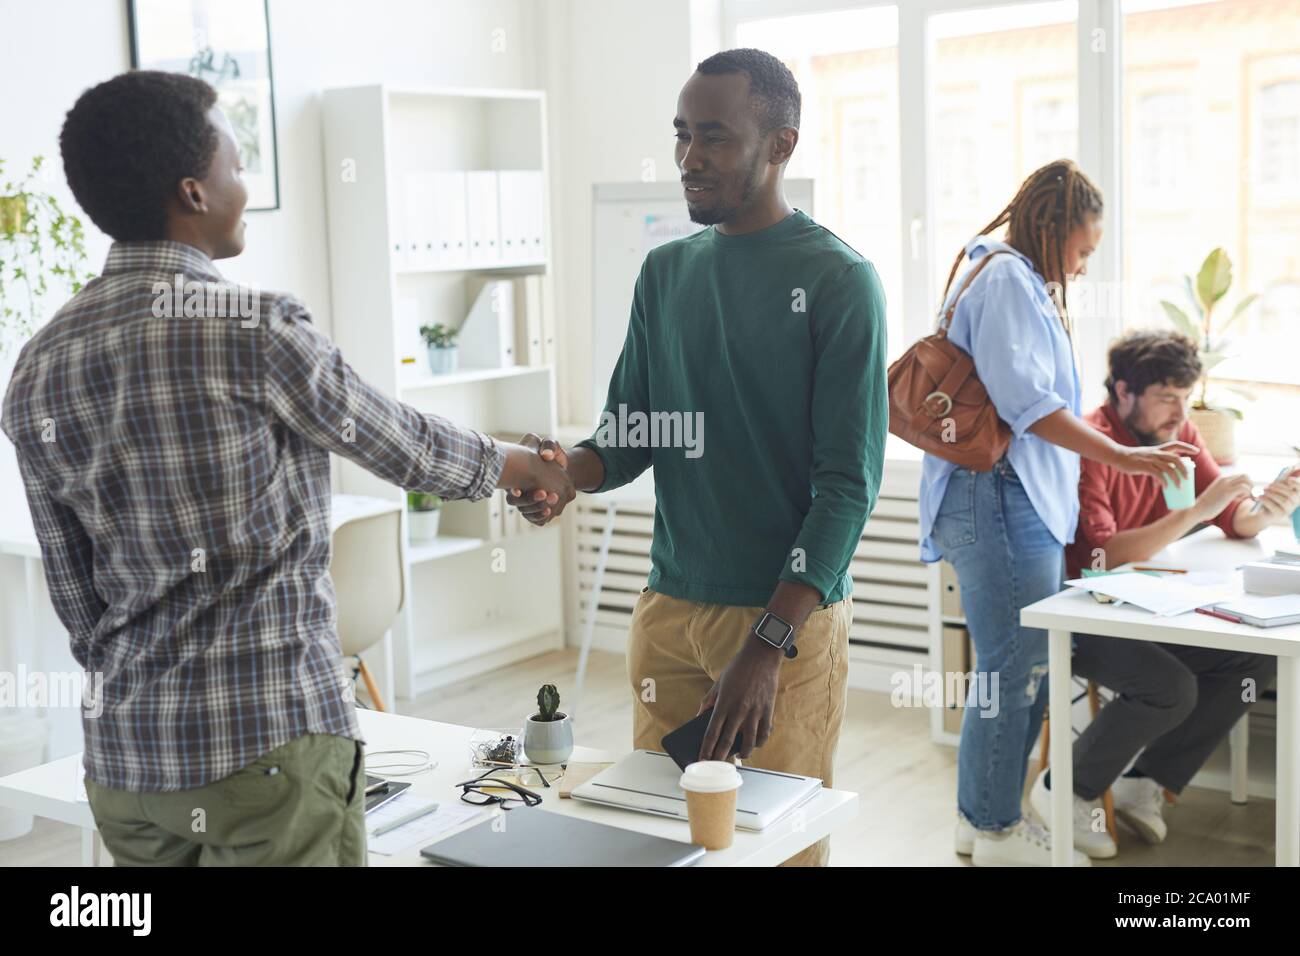 Portrait of young African-American man dressed in casual wear shaking hands with colleague across table during first day at new job, copy space Stock Photo